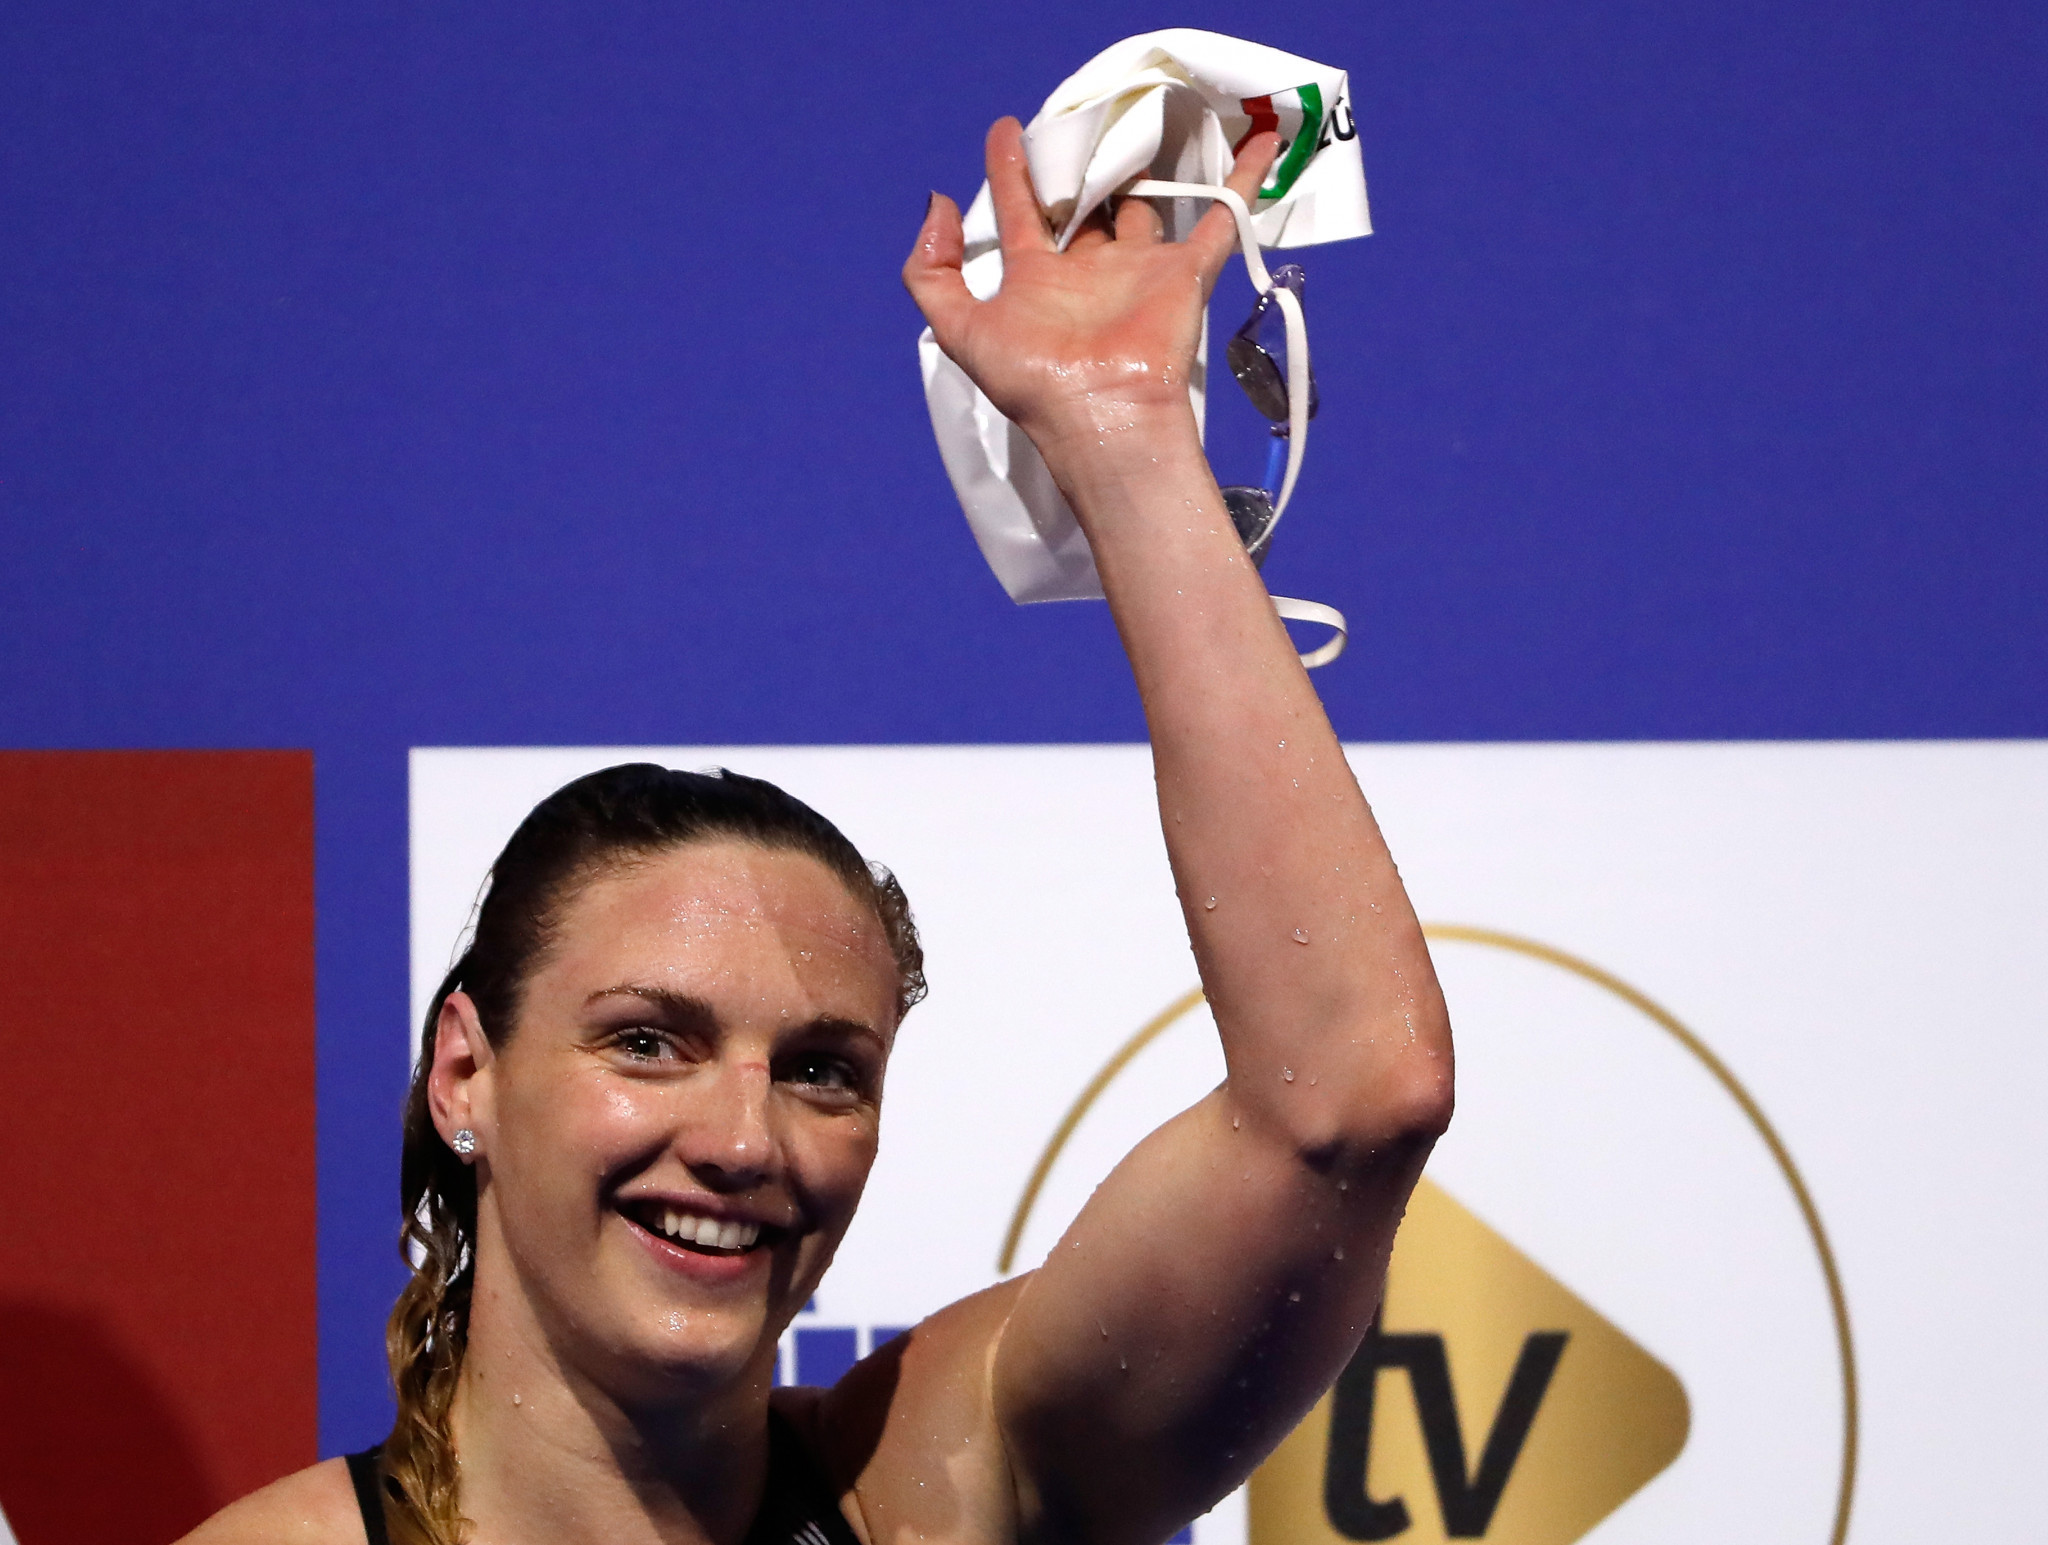 Hungary’s triple Olympic champion Katinka Hosszú wants the newly formed International Swimming League to help promote swimmers so they can make a living from the sport @Getty Images